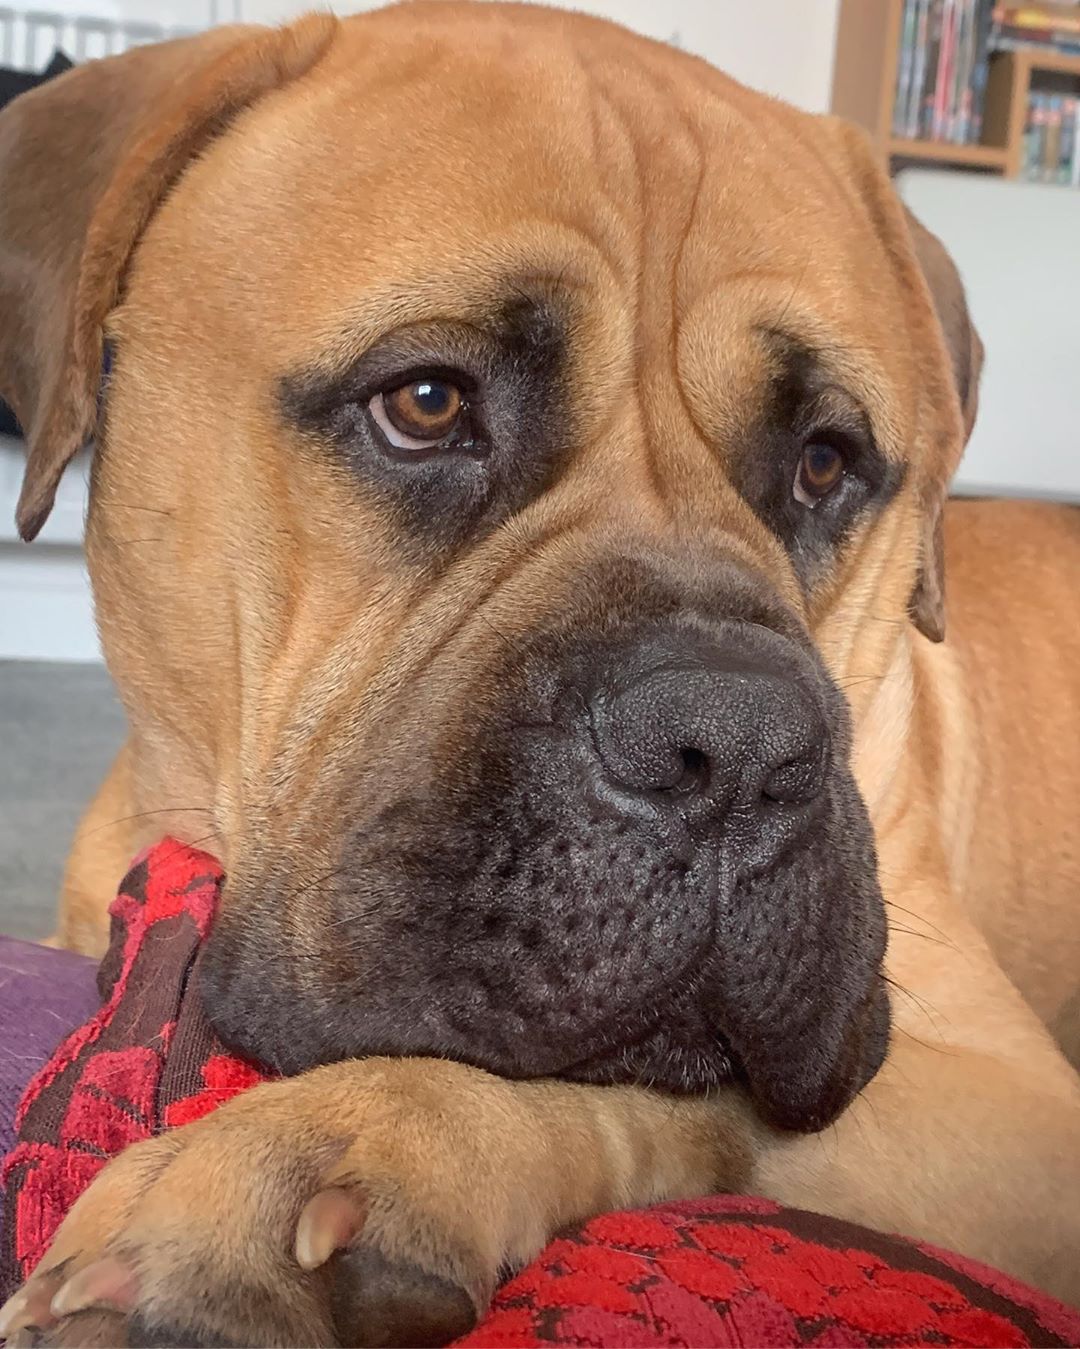 A Mastiff lying on the couch with its sad face